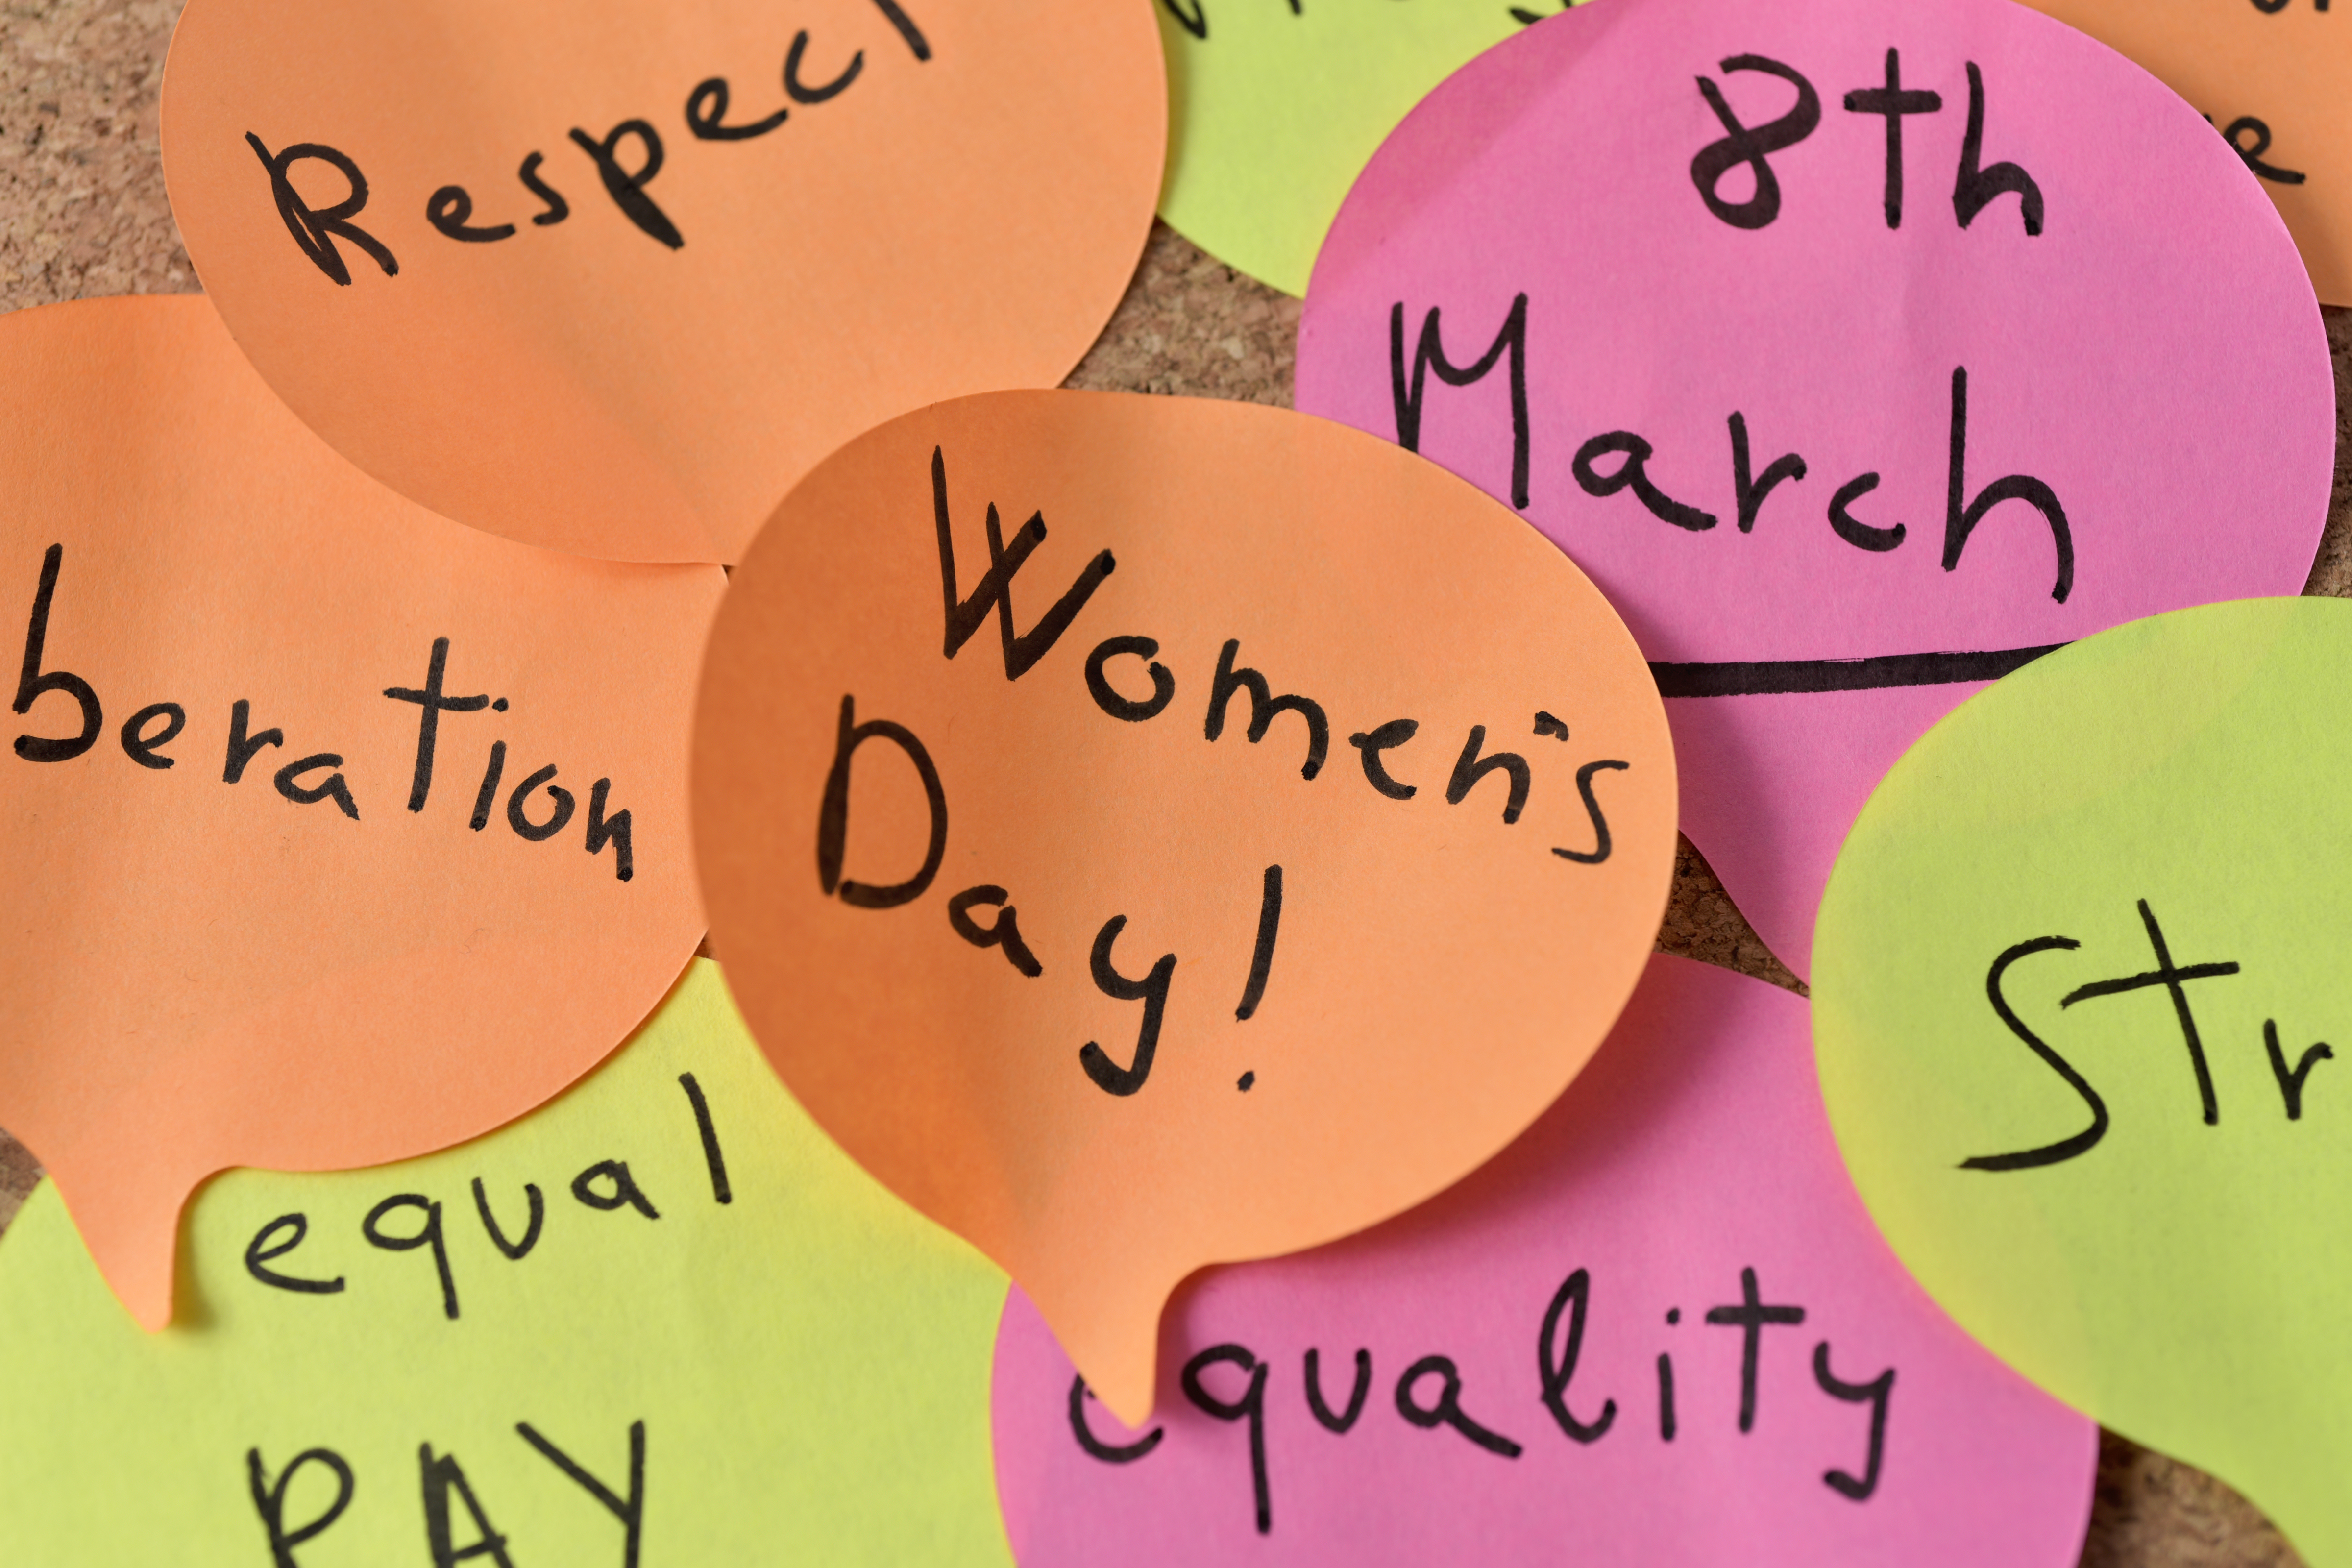 Rev. Frances Deverell "International Women's Day: Are We There Yet?"